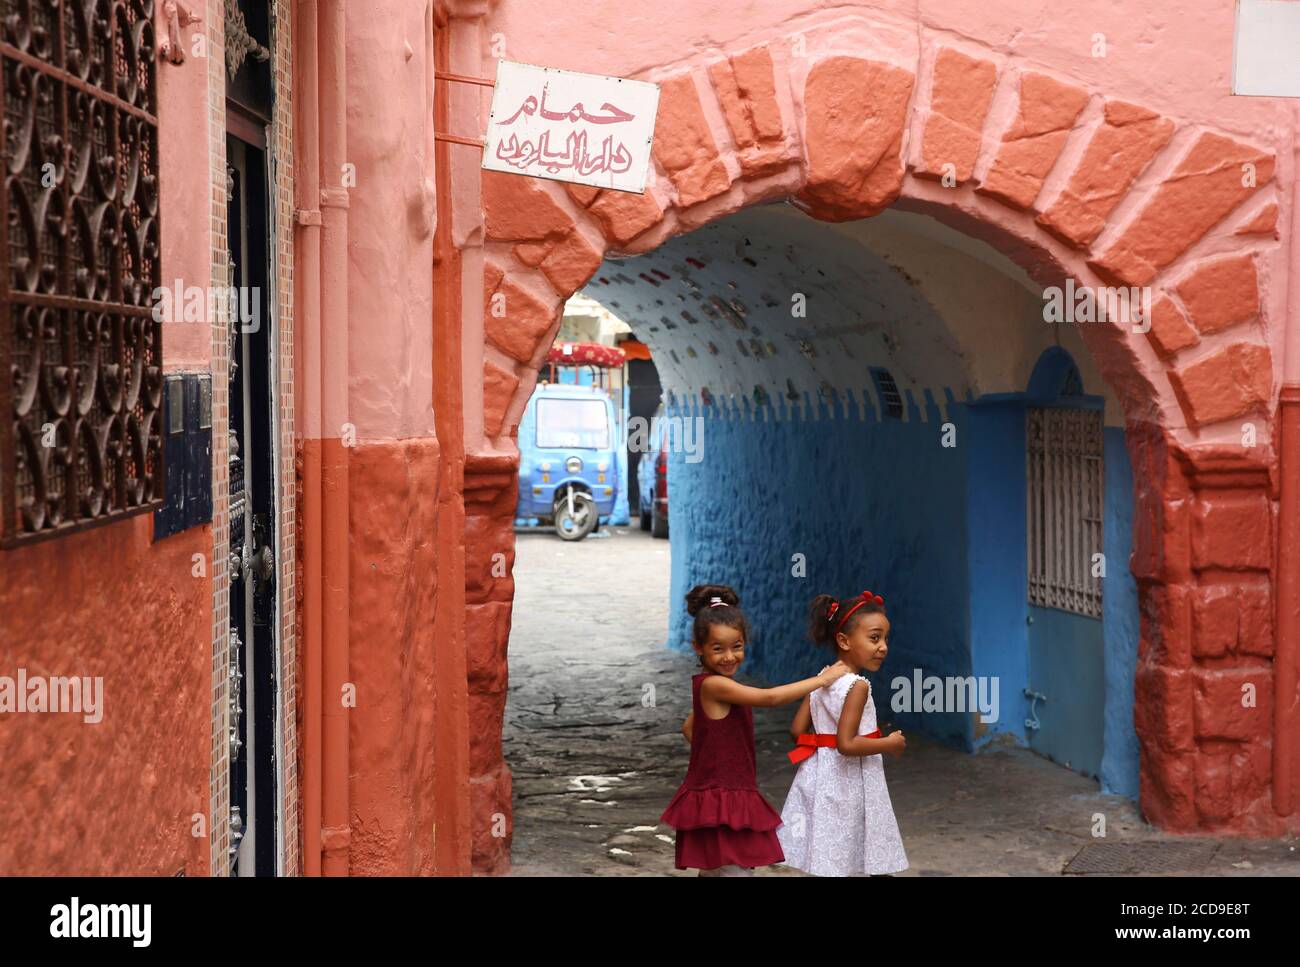 Morocco, Tangier Tetouan region, Tangier, Moroccan girls in dress in a colorful alley of the medina Stock Photo